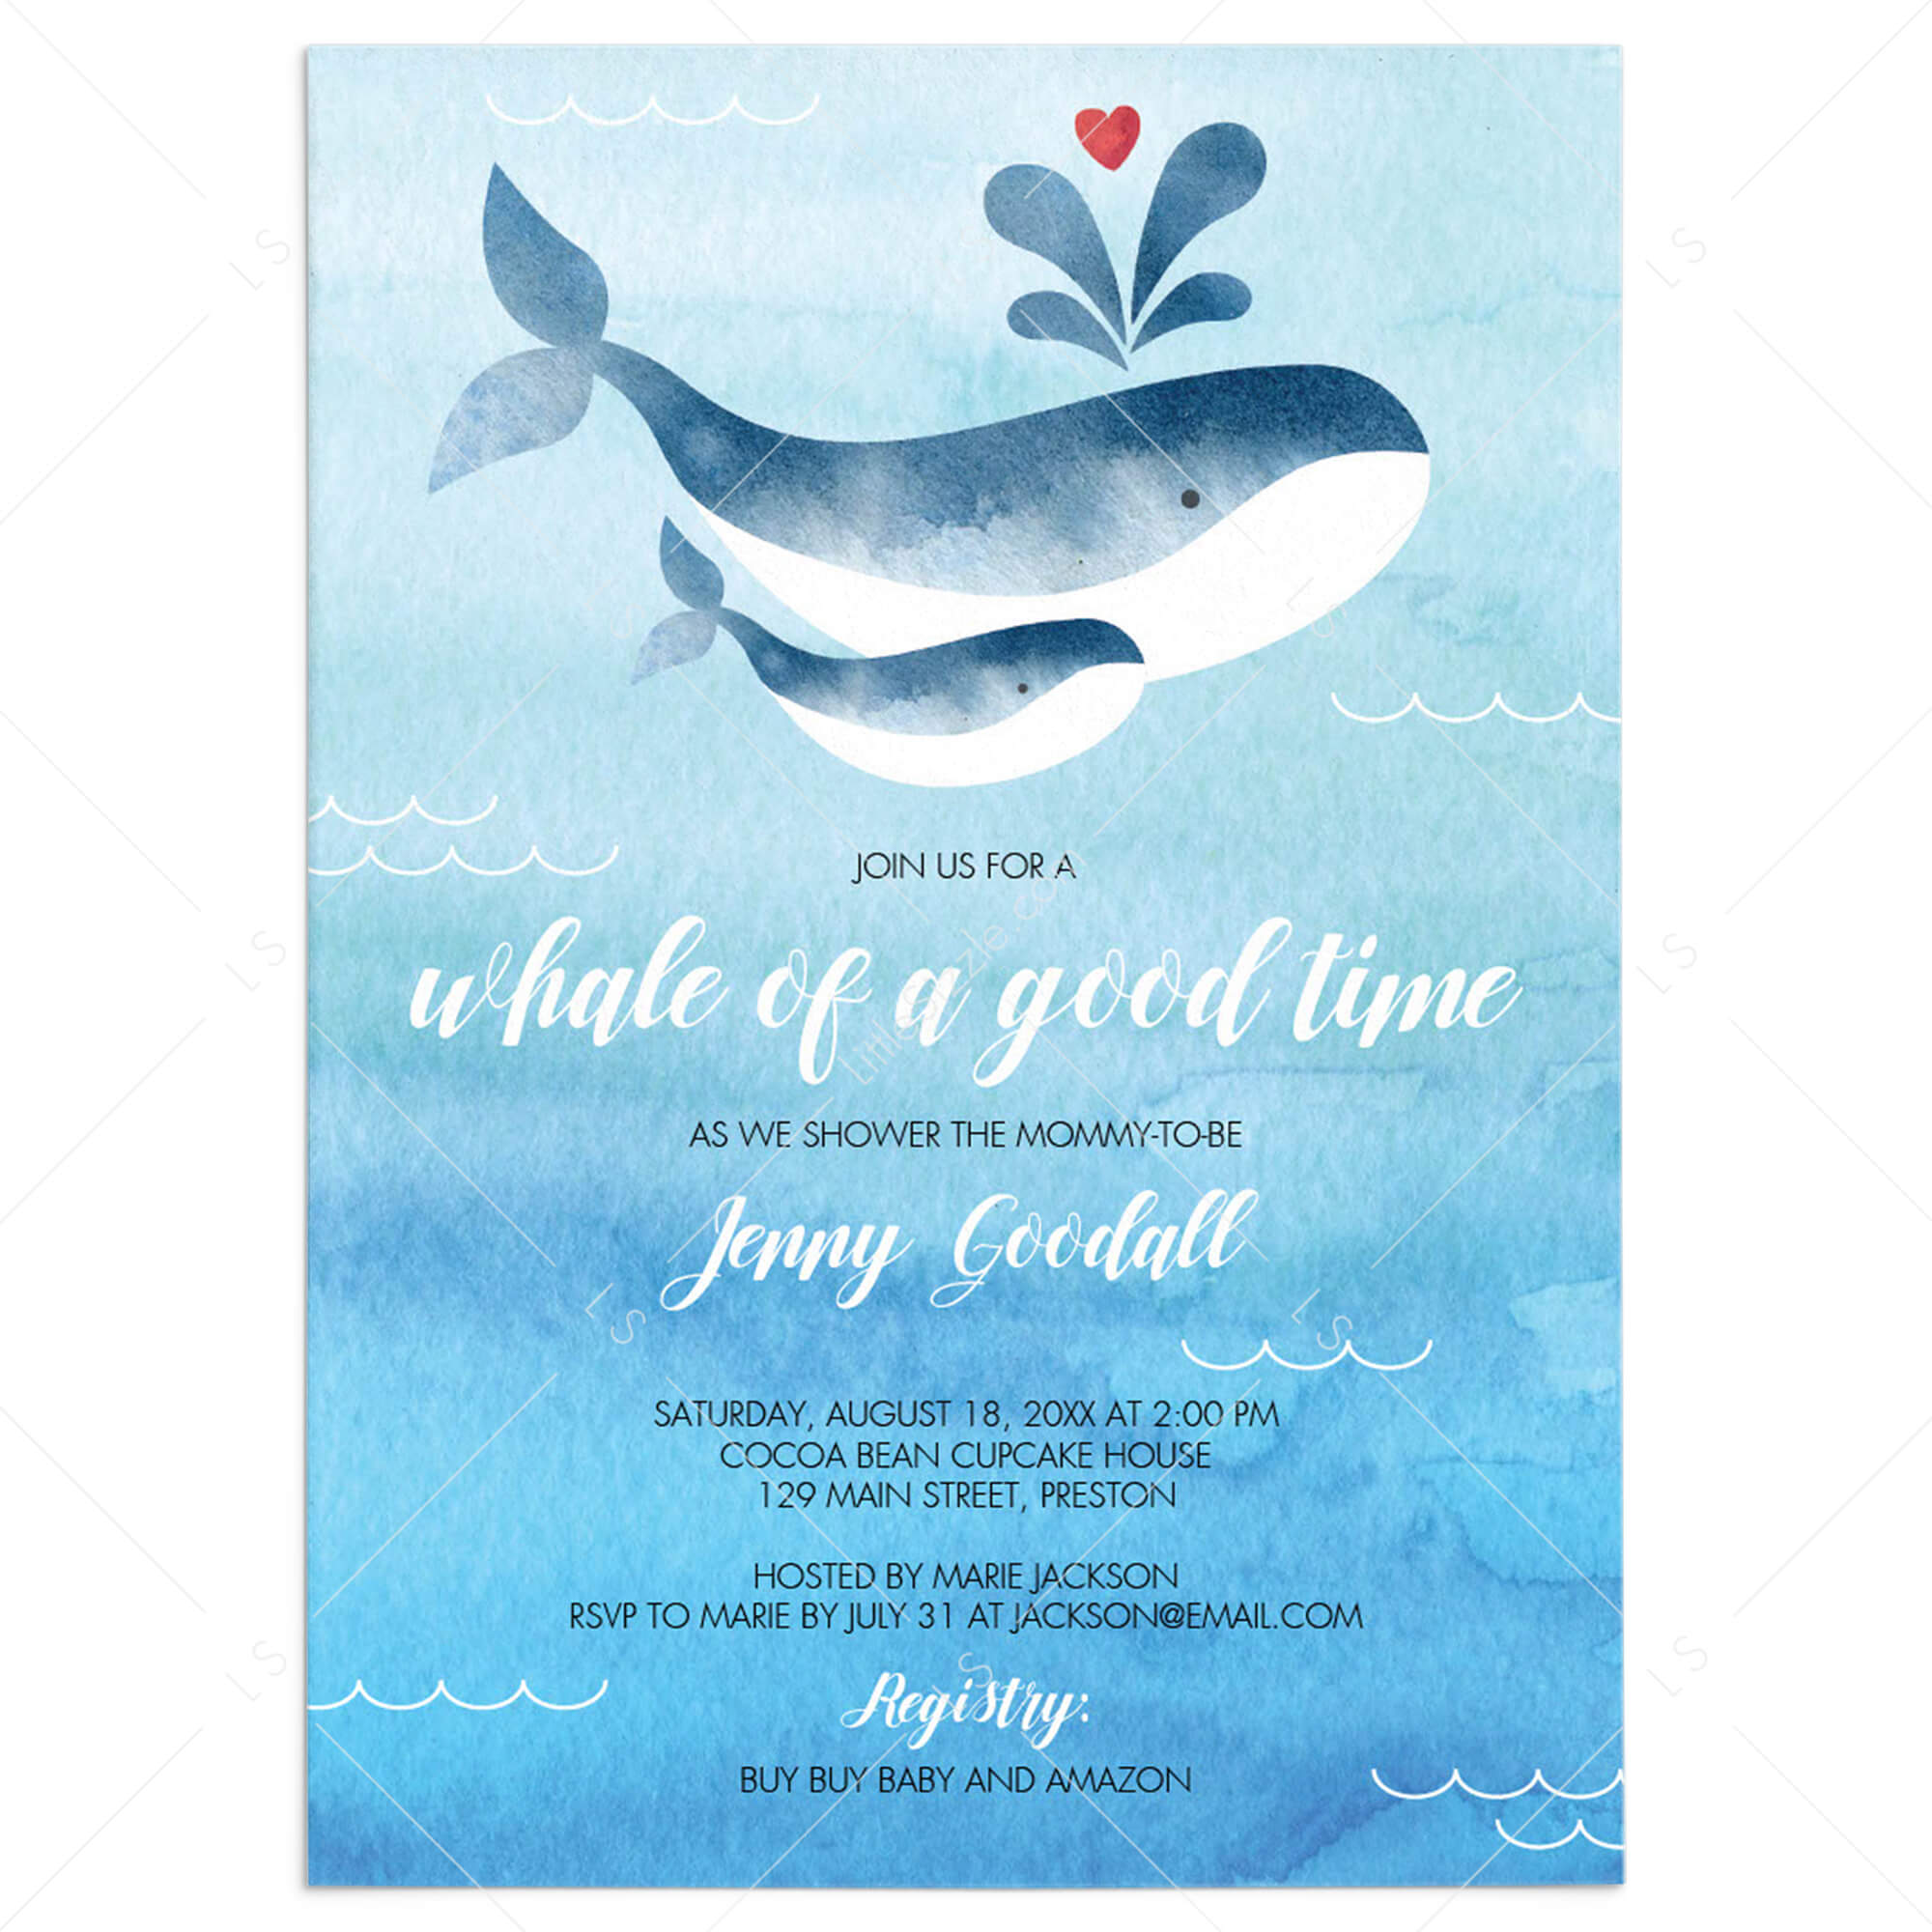 Whale baby shower invitation template